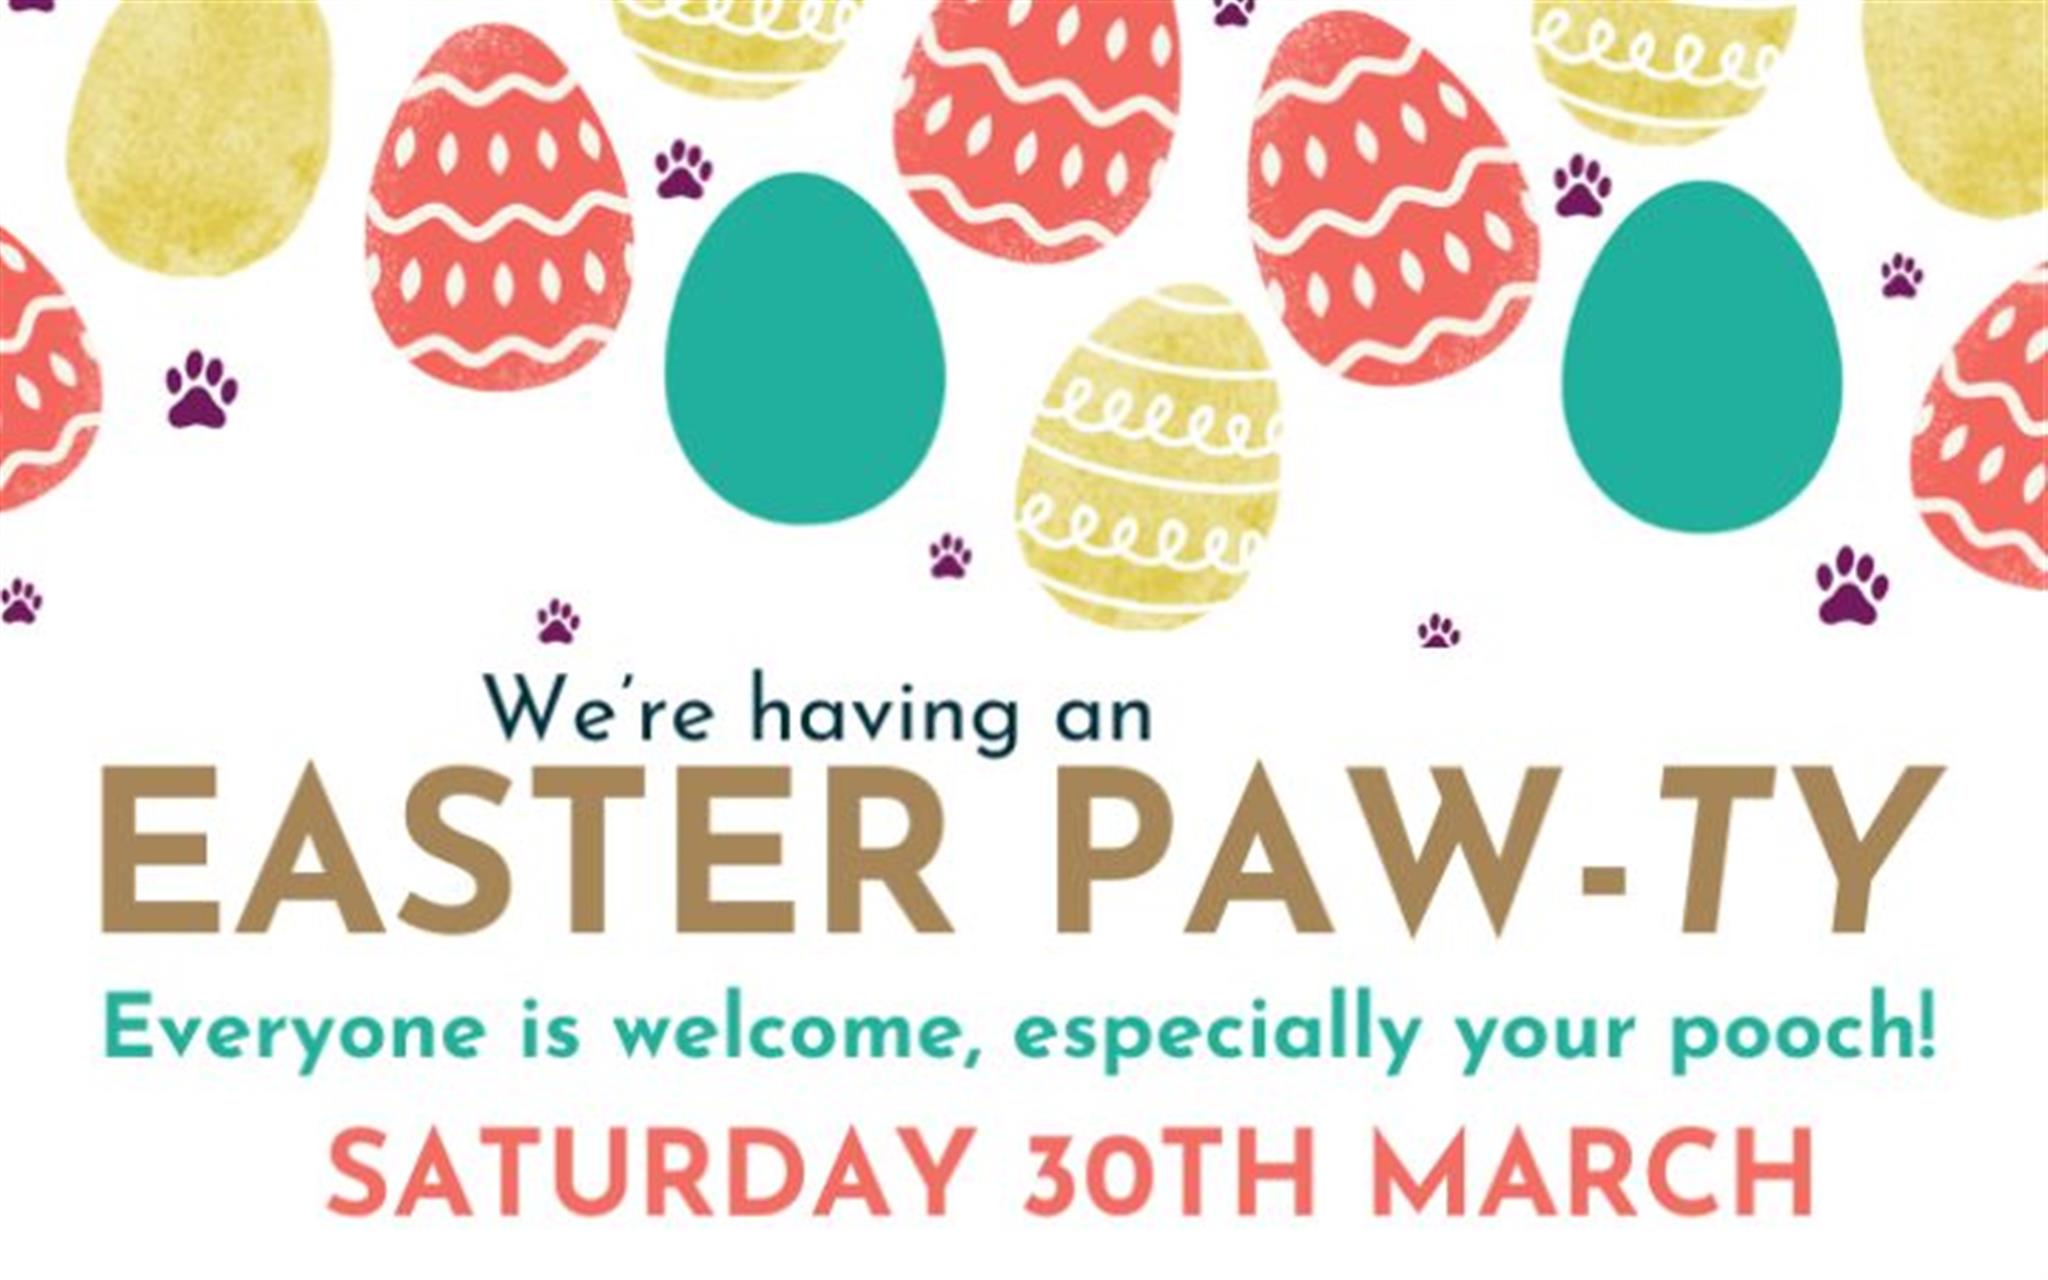 Easter Paw-ty at the National Horseracing Museum